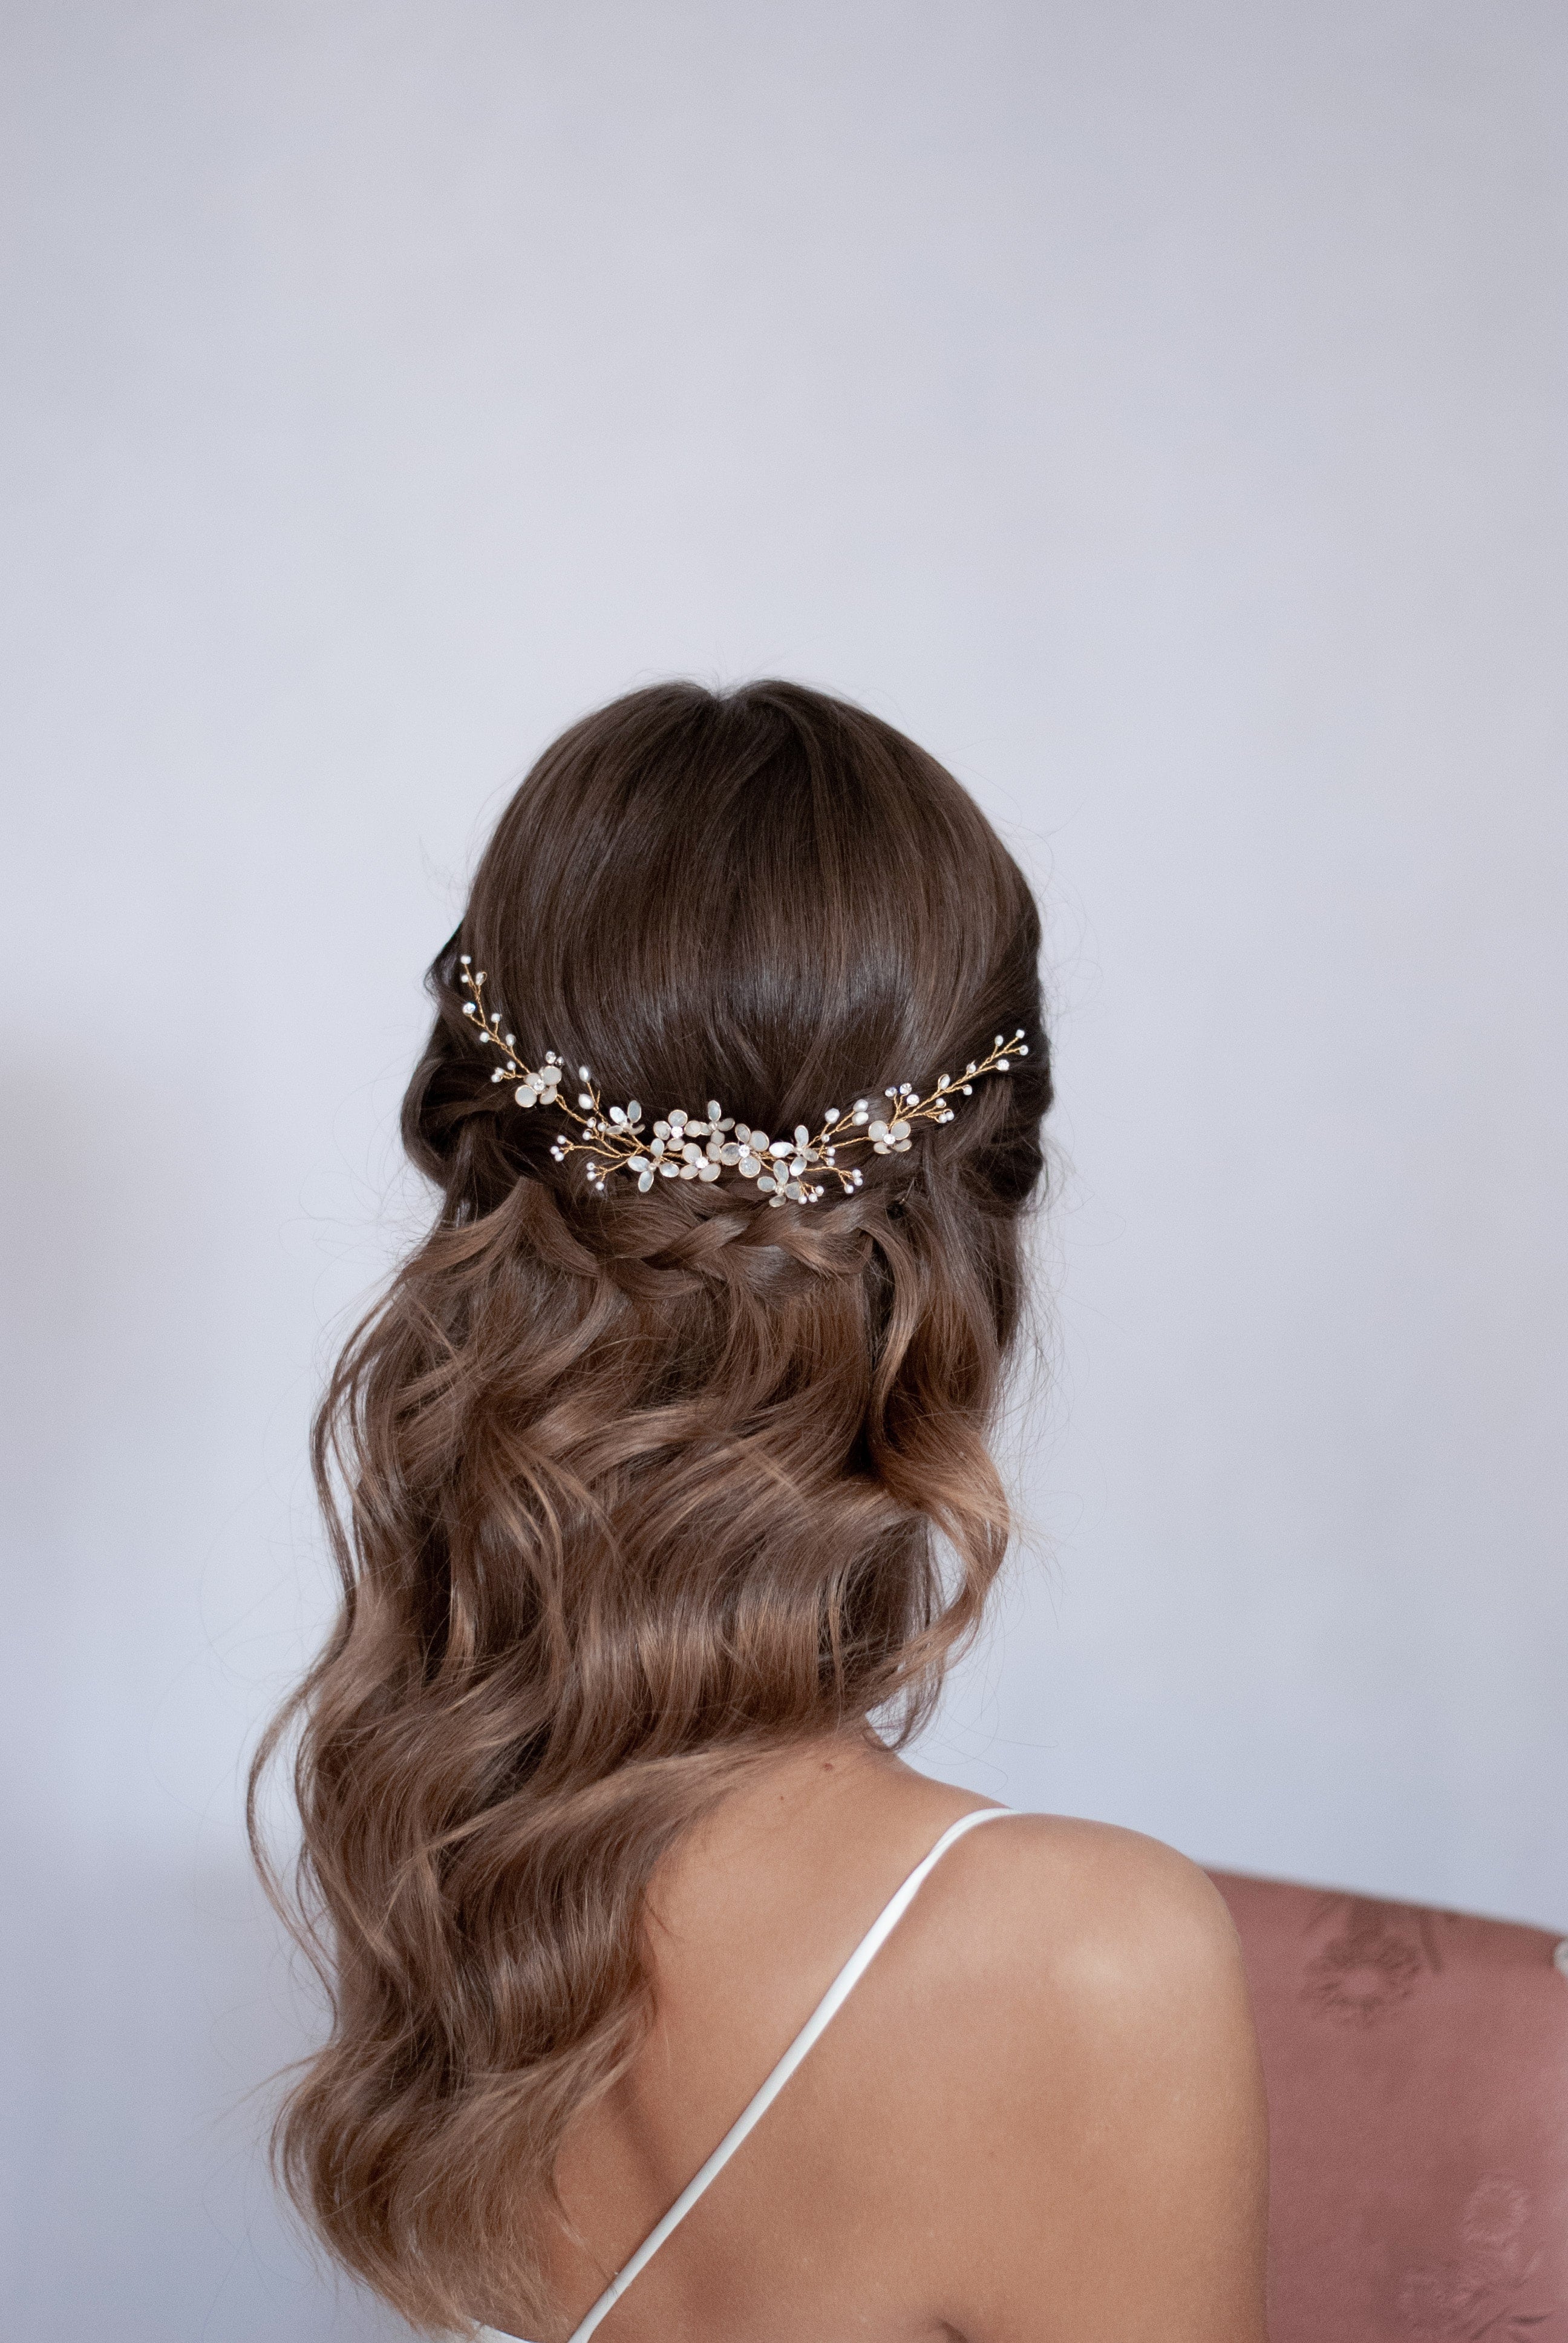 Iridescent flowers and pearls headpiece